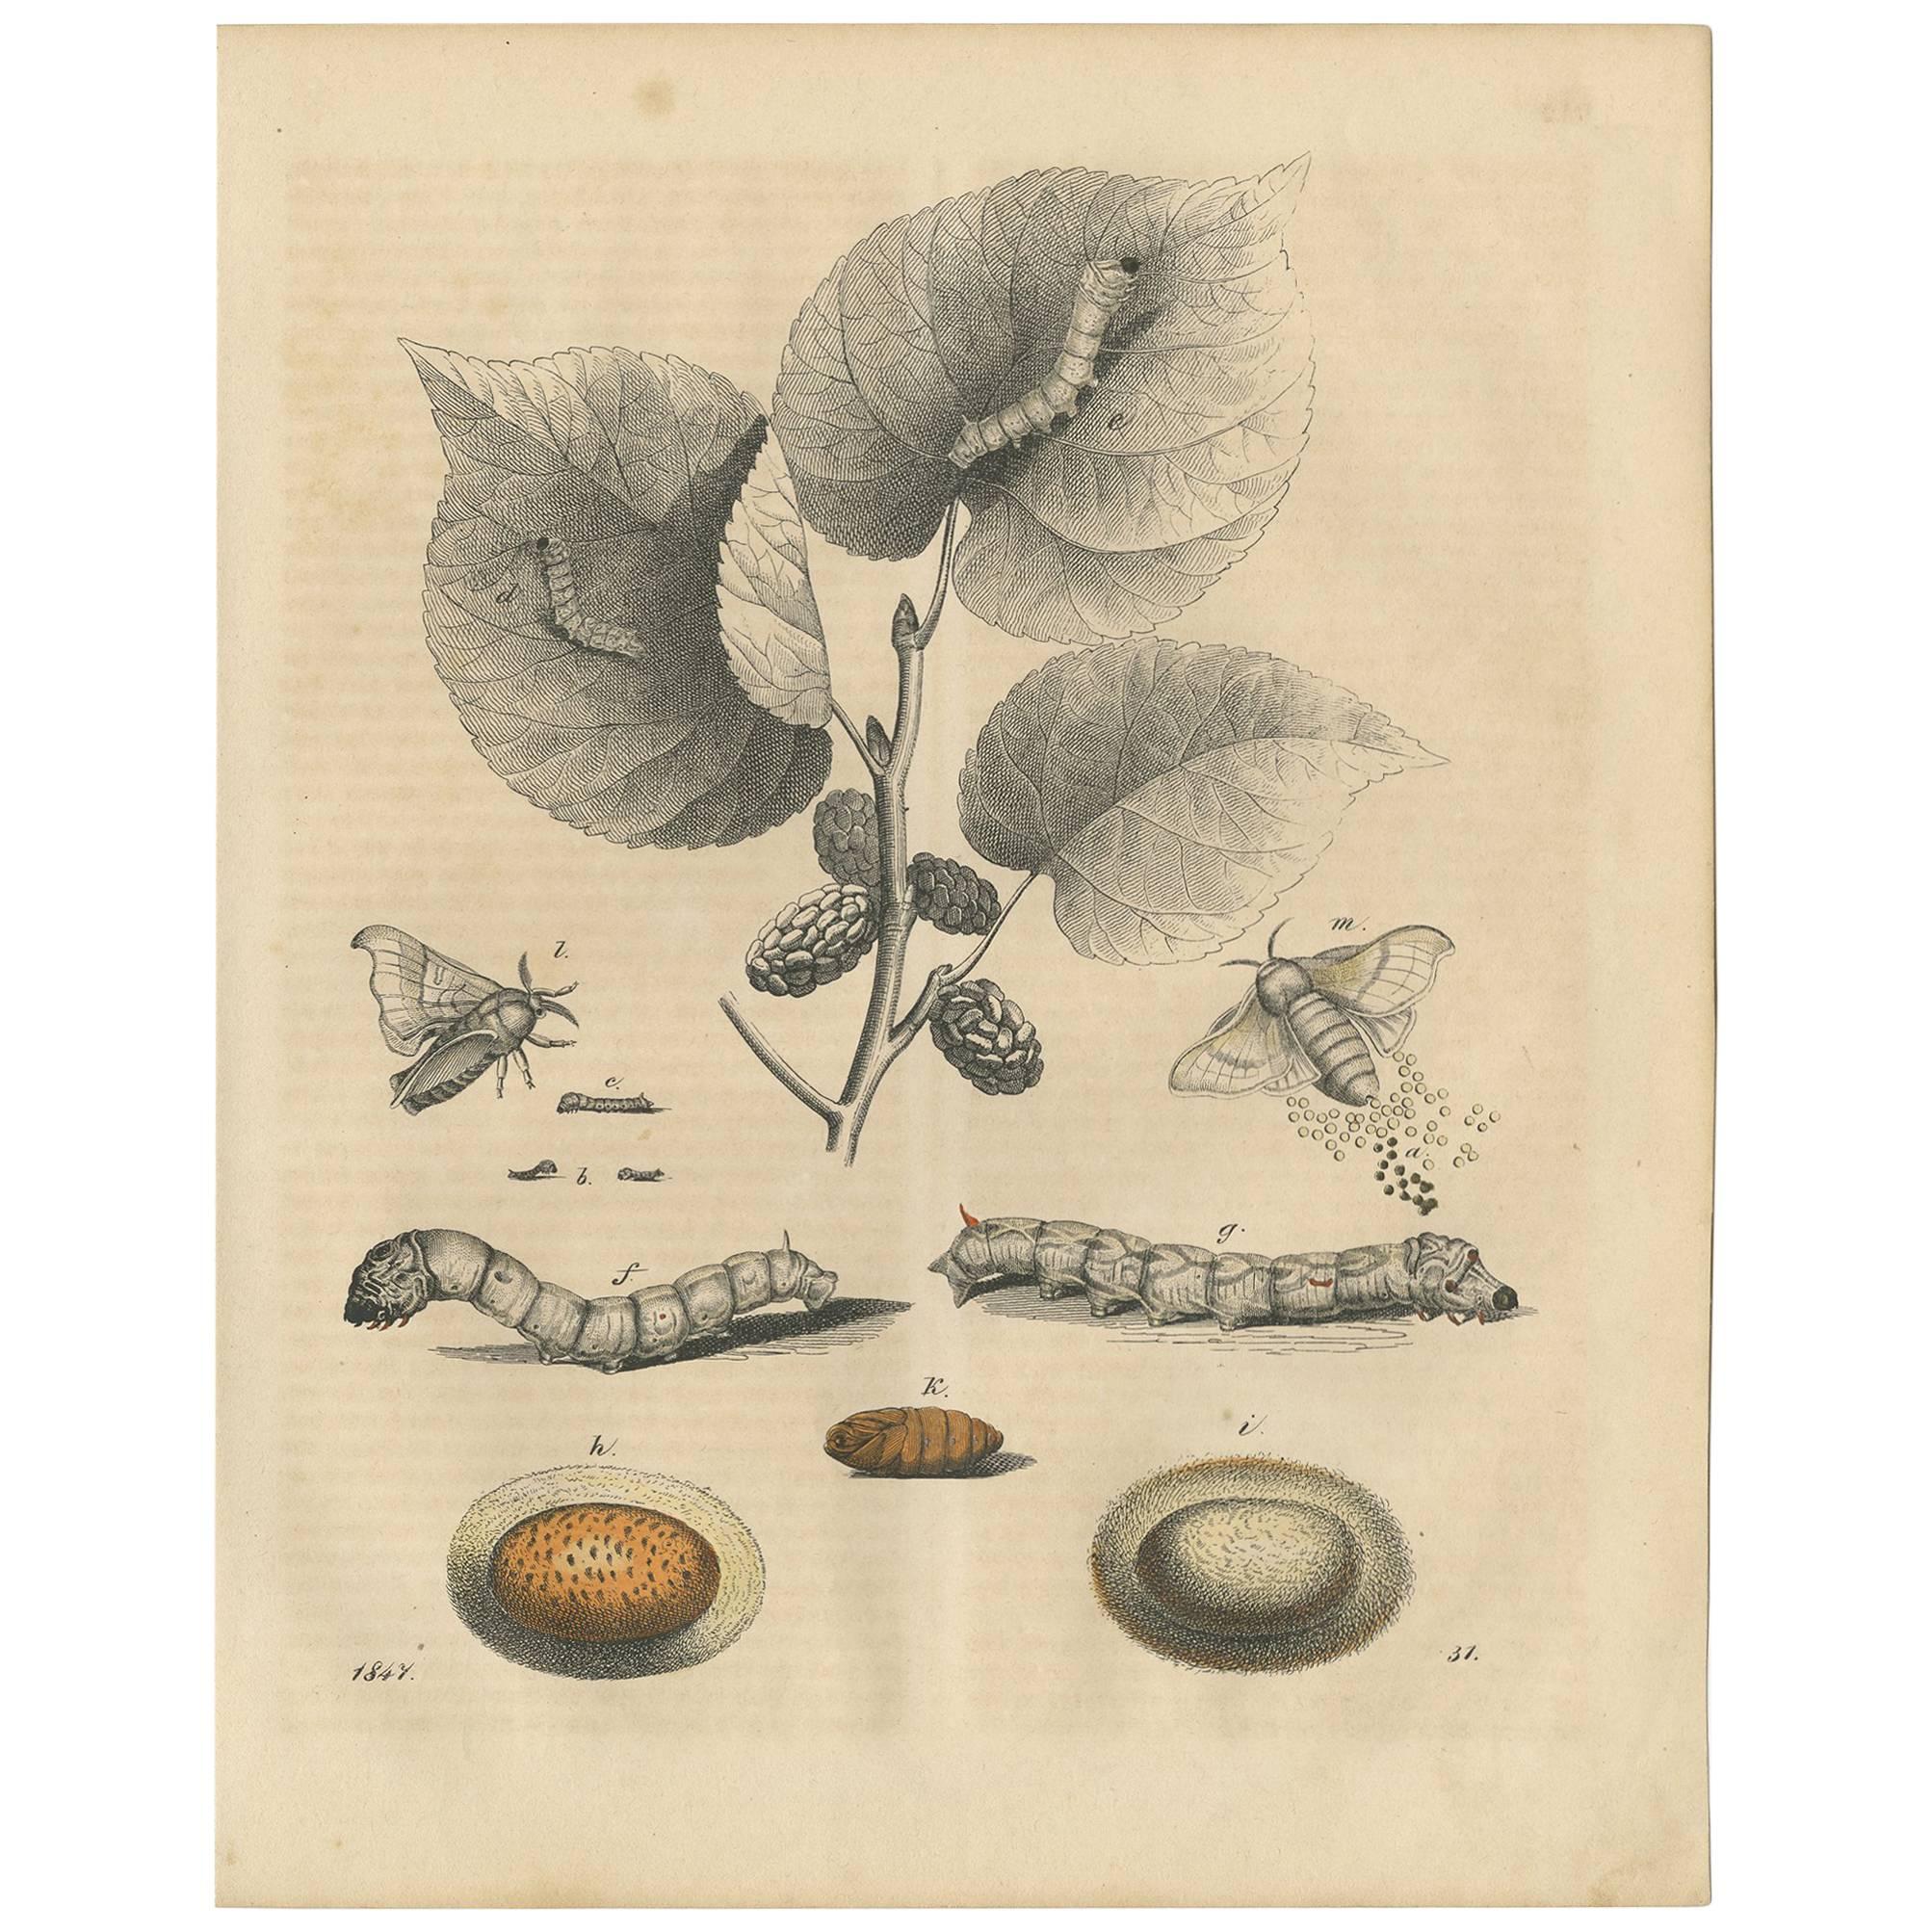 Antique Animal Print of Caterpillars, Moths and Pupa by C. Hoffmann, 1847